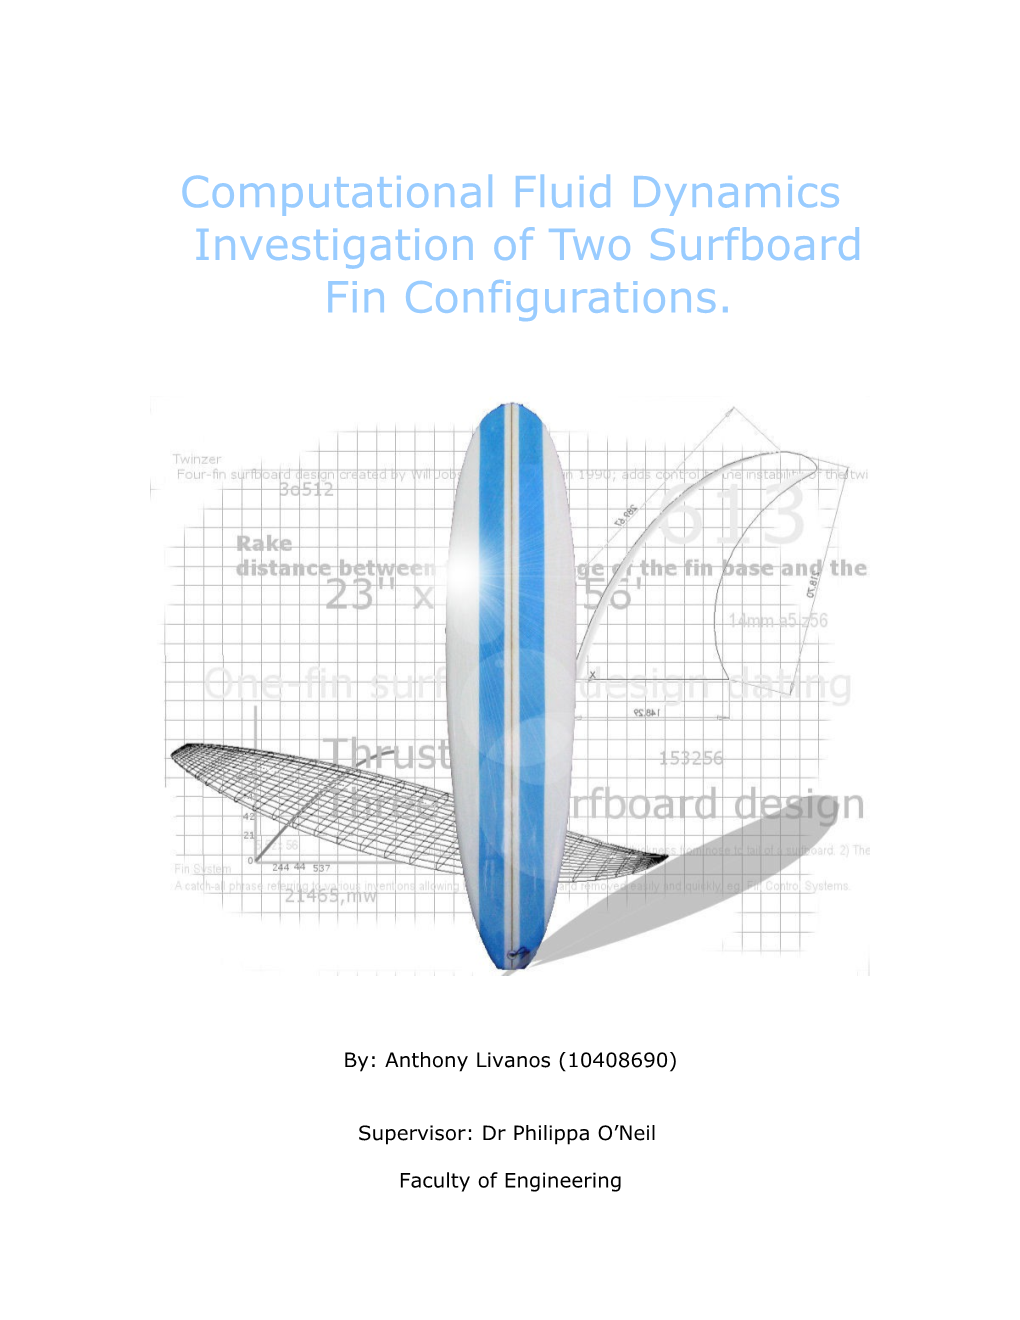 Computational Fluid Dynamics Investigation of Two Surfboard Fin Configurations